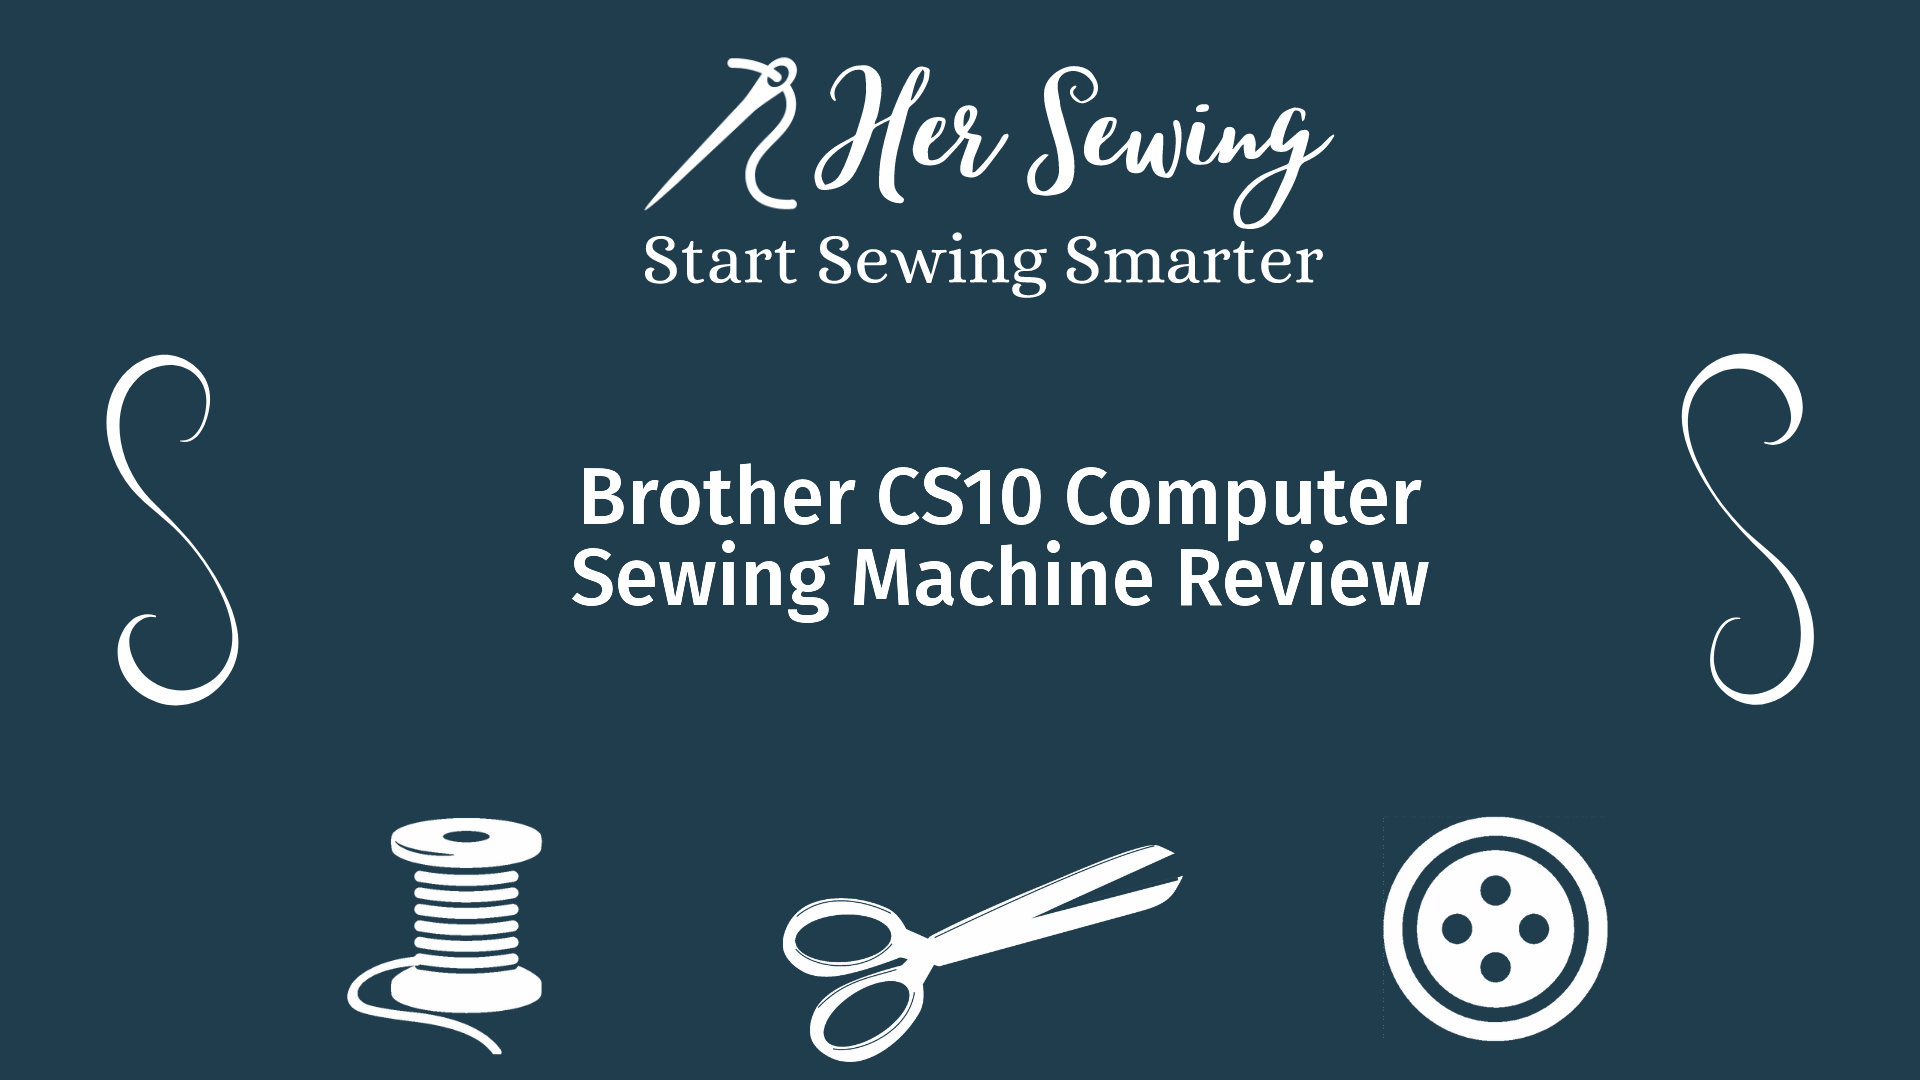 Brother CS10 Computer Sewing Machine Review